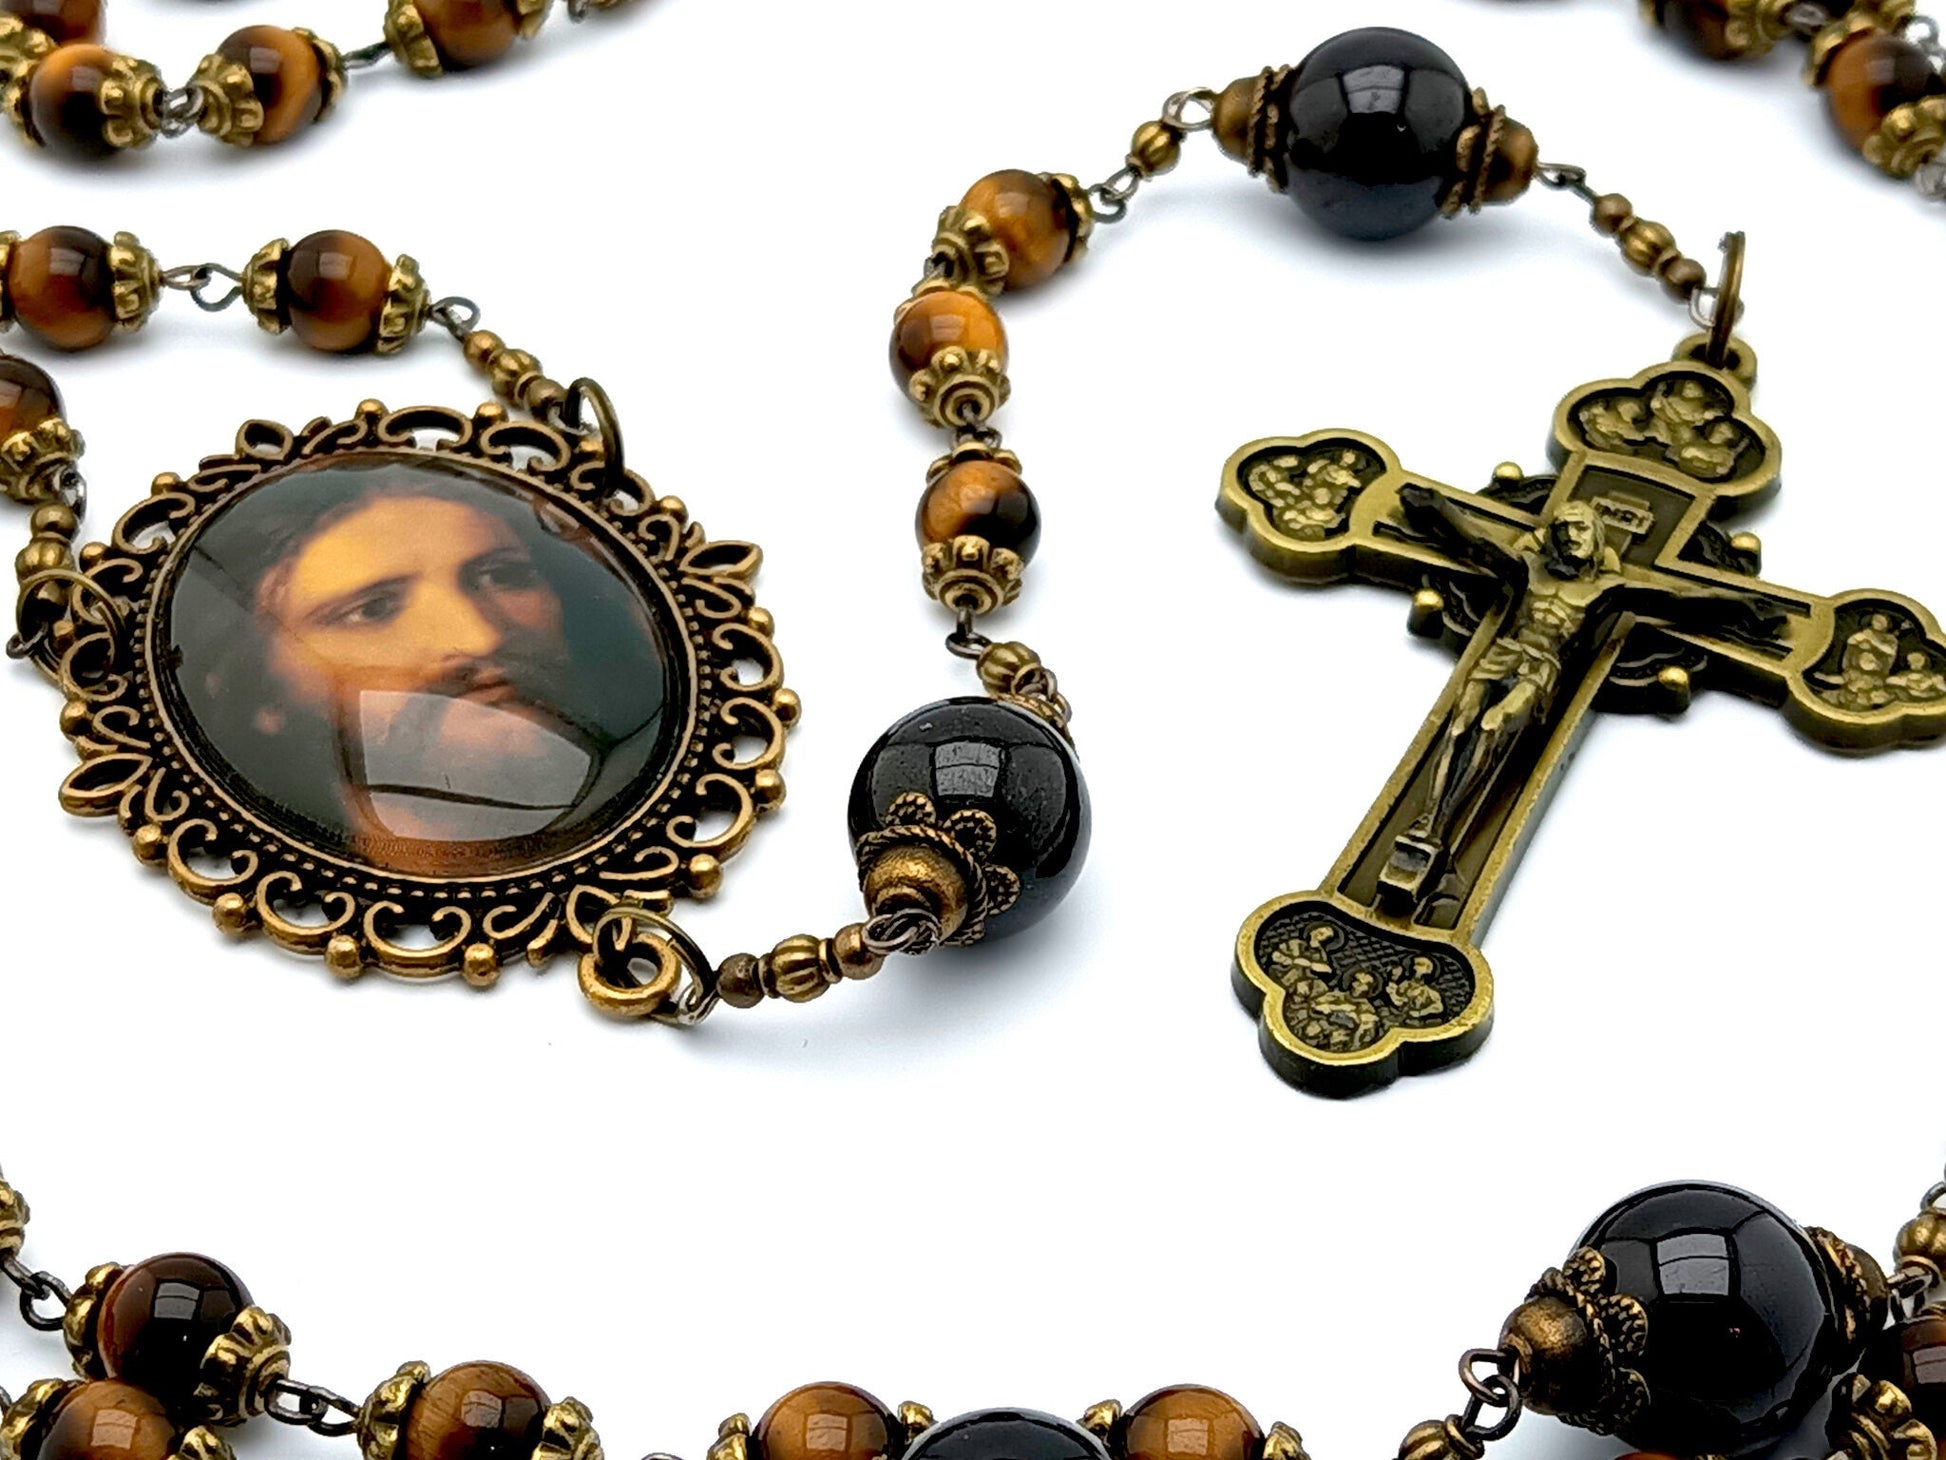 Holy face of Jesus unique rosary beads with tigers eye and garnet gemstone beads, bronze twelve apostles crucifix and Holy face centre medal.